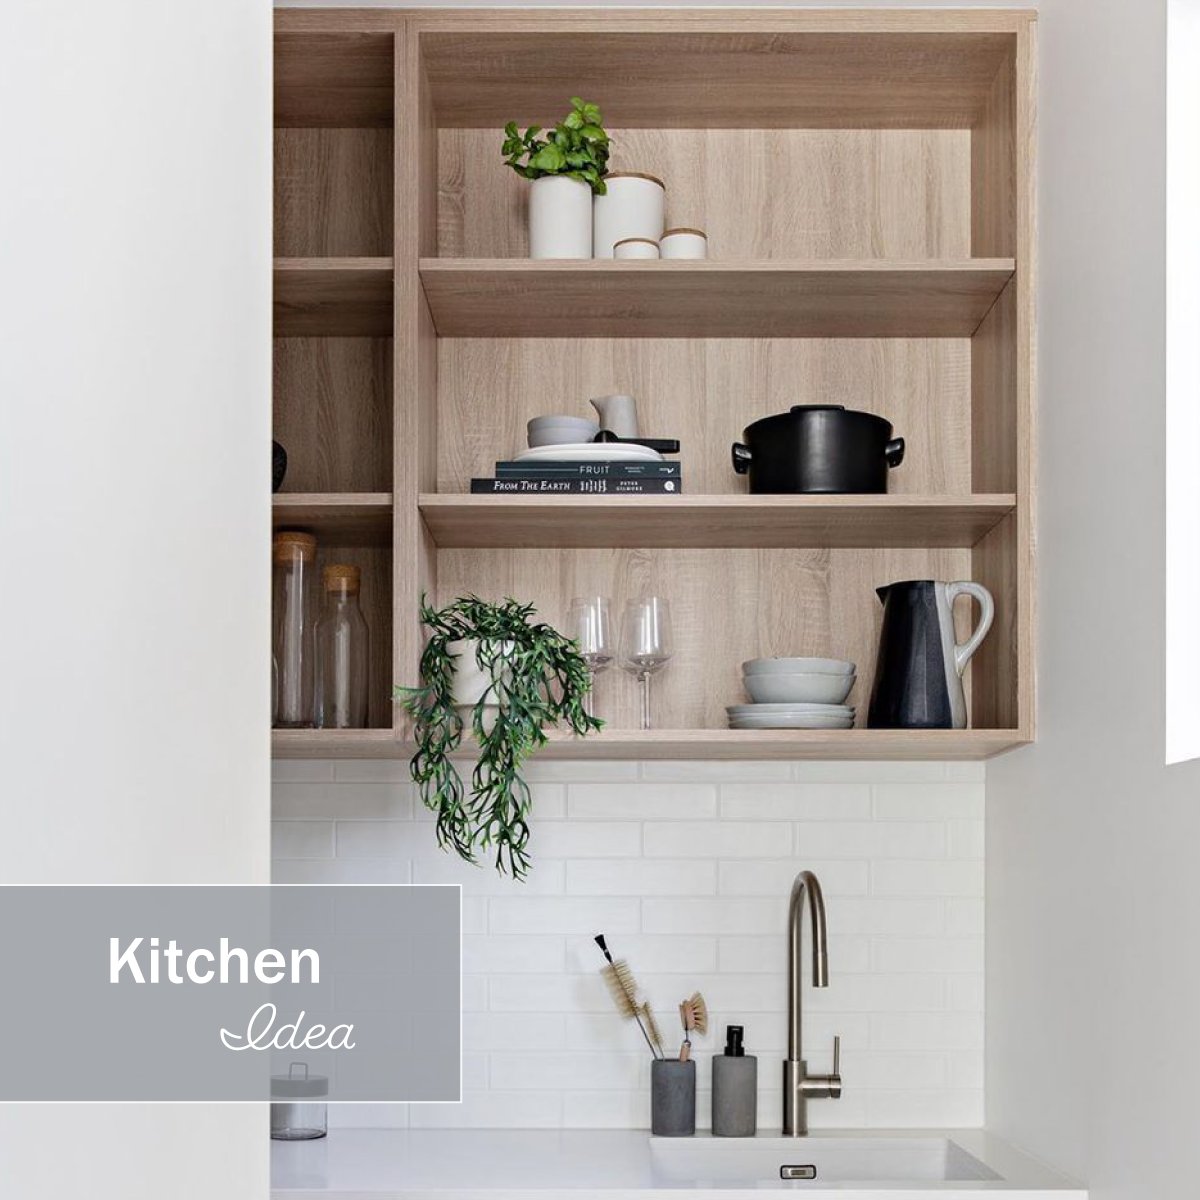 Are you one of the lucky few who has too much space in their kitchen? 👀 We know it's rare, but when it happens it can leave aspects of your kitchen looking a bit bare. To fill up shelves use statement decorative pieces and plants to bring life back into your space! 🌿